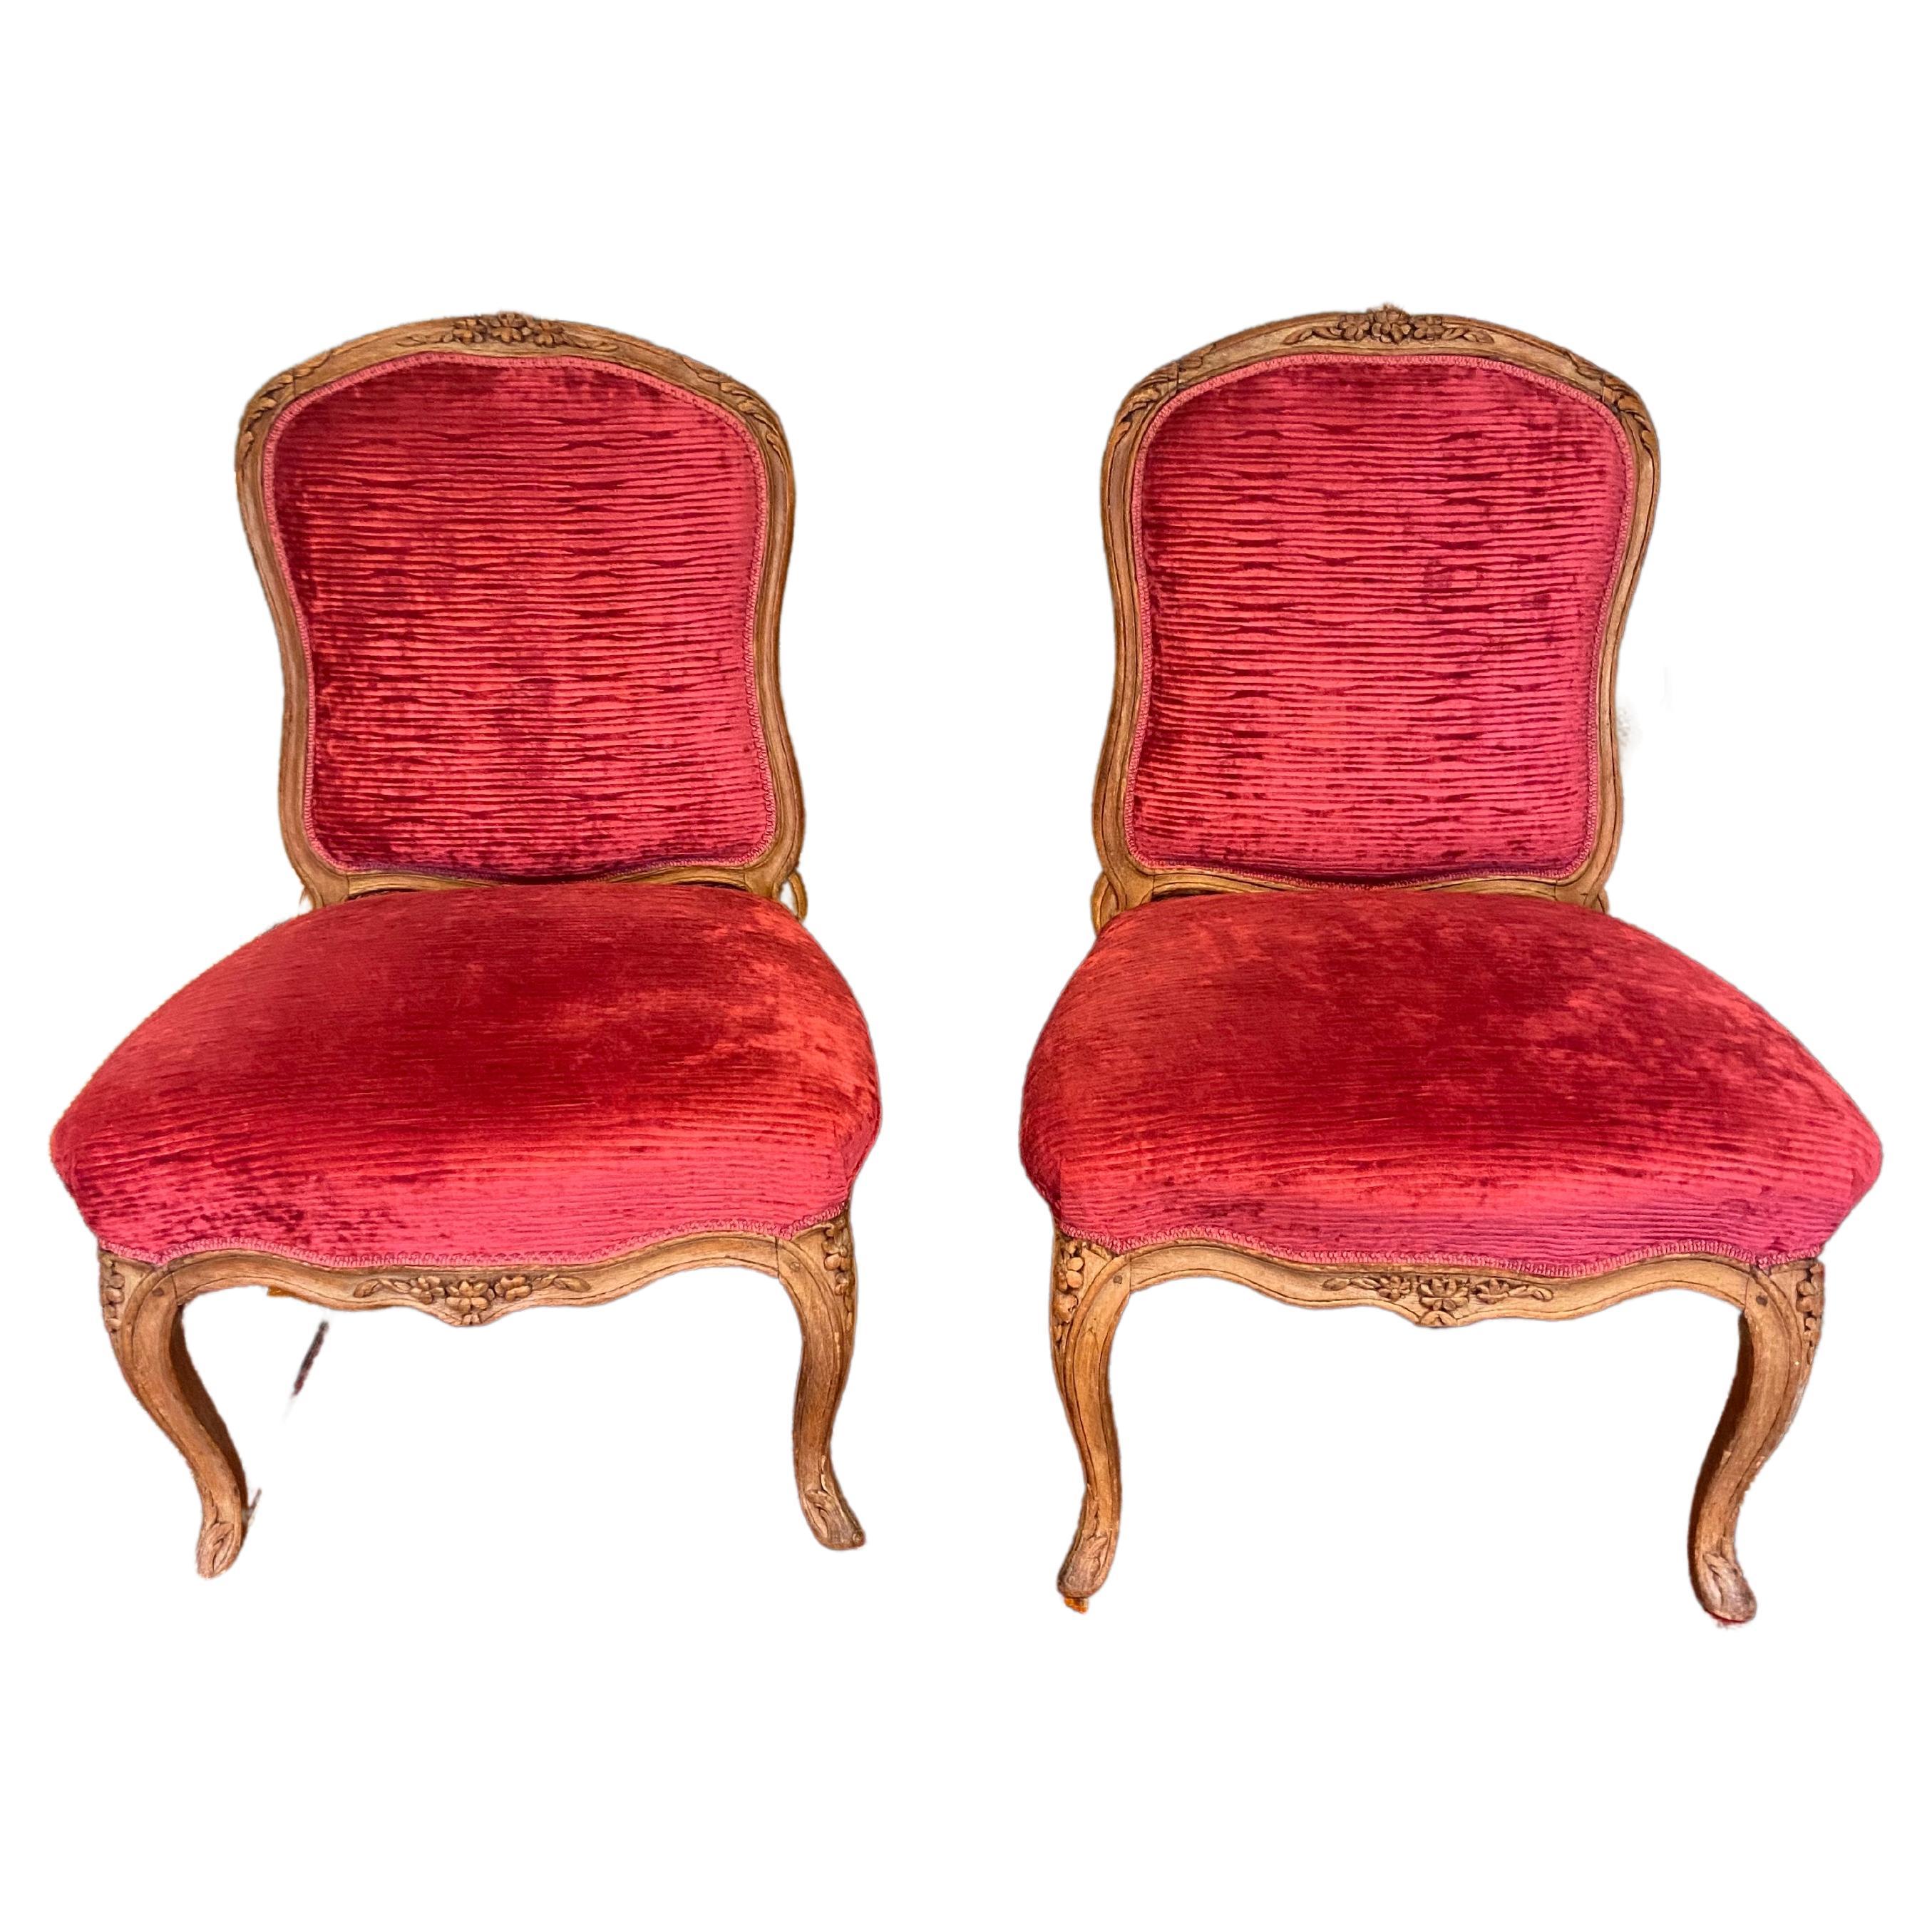 Pair of Period Louis XV Beechwood Salon Chairs 'Mid 18th Century' For Sale